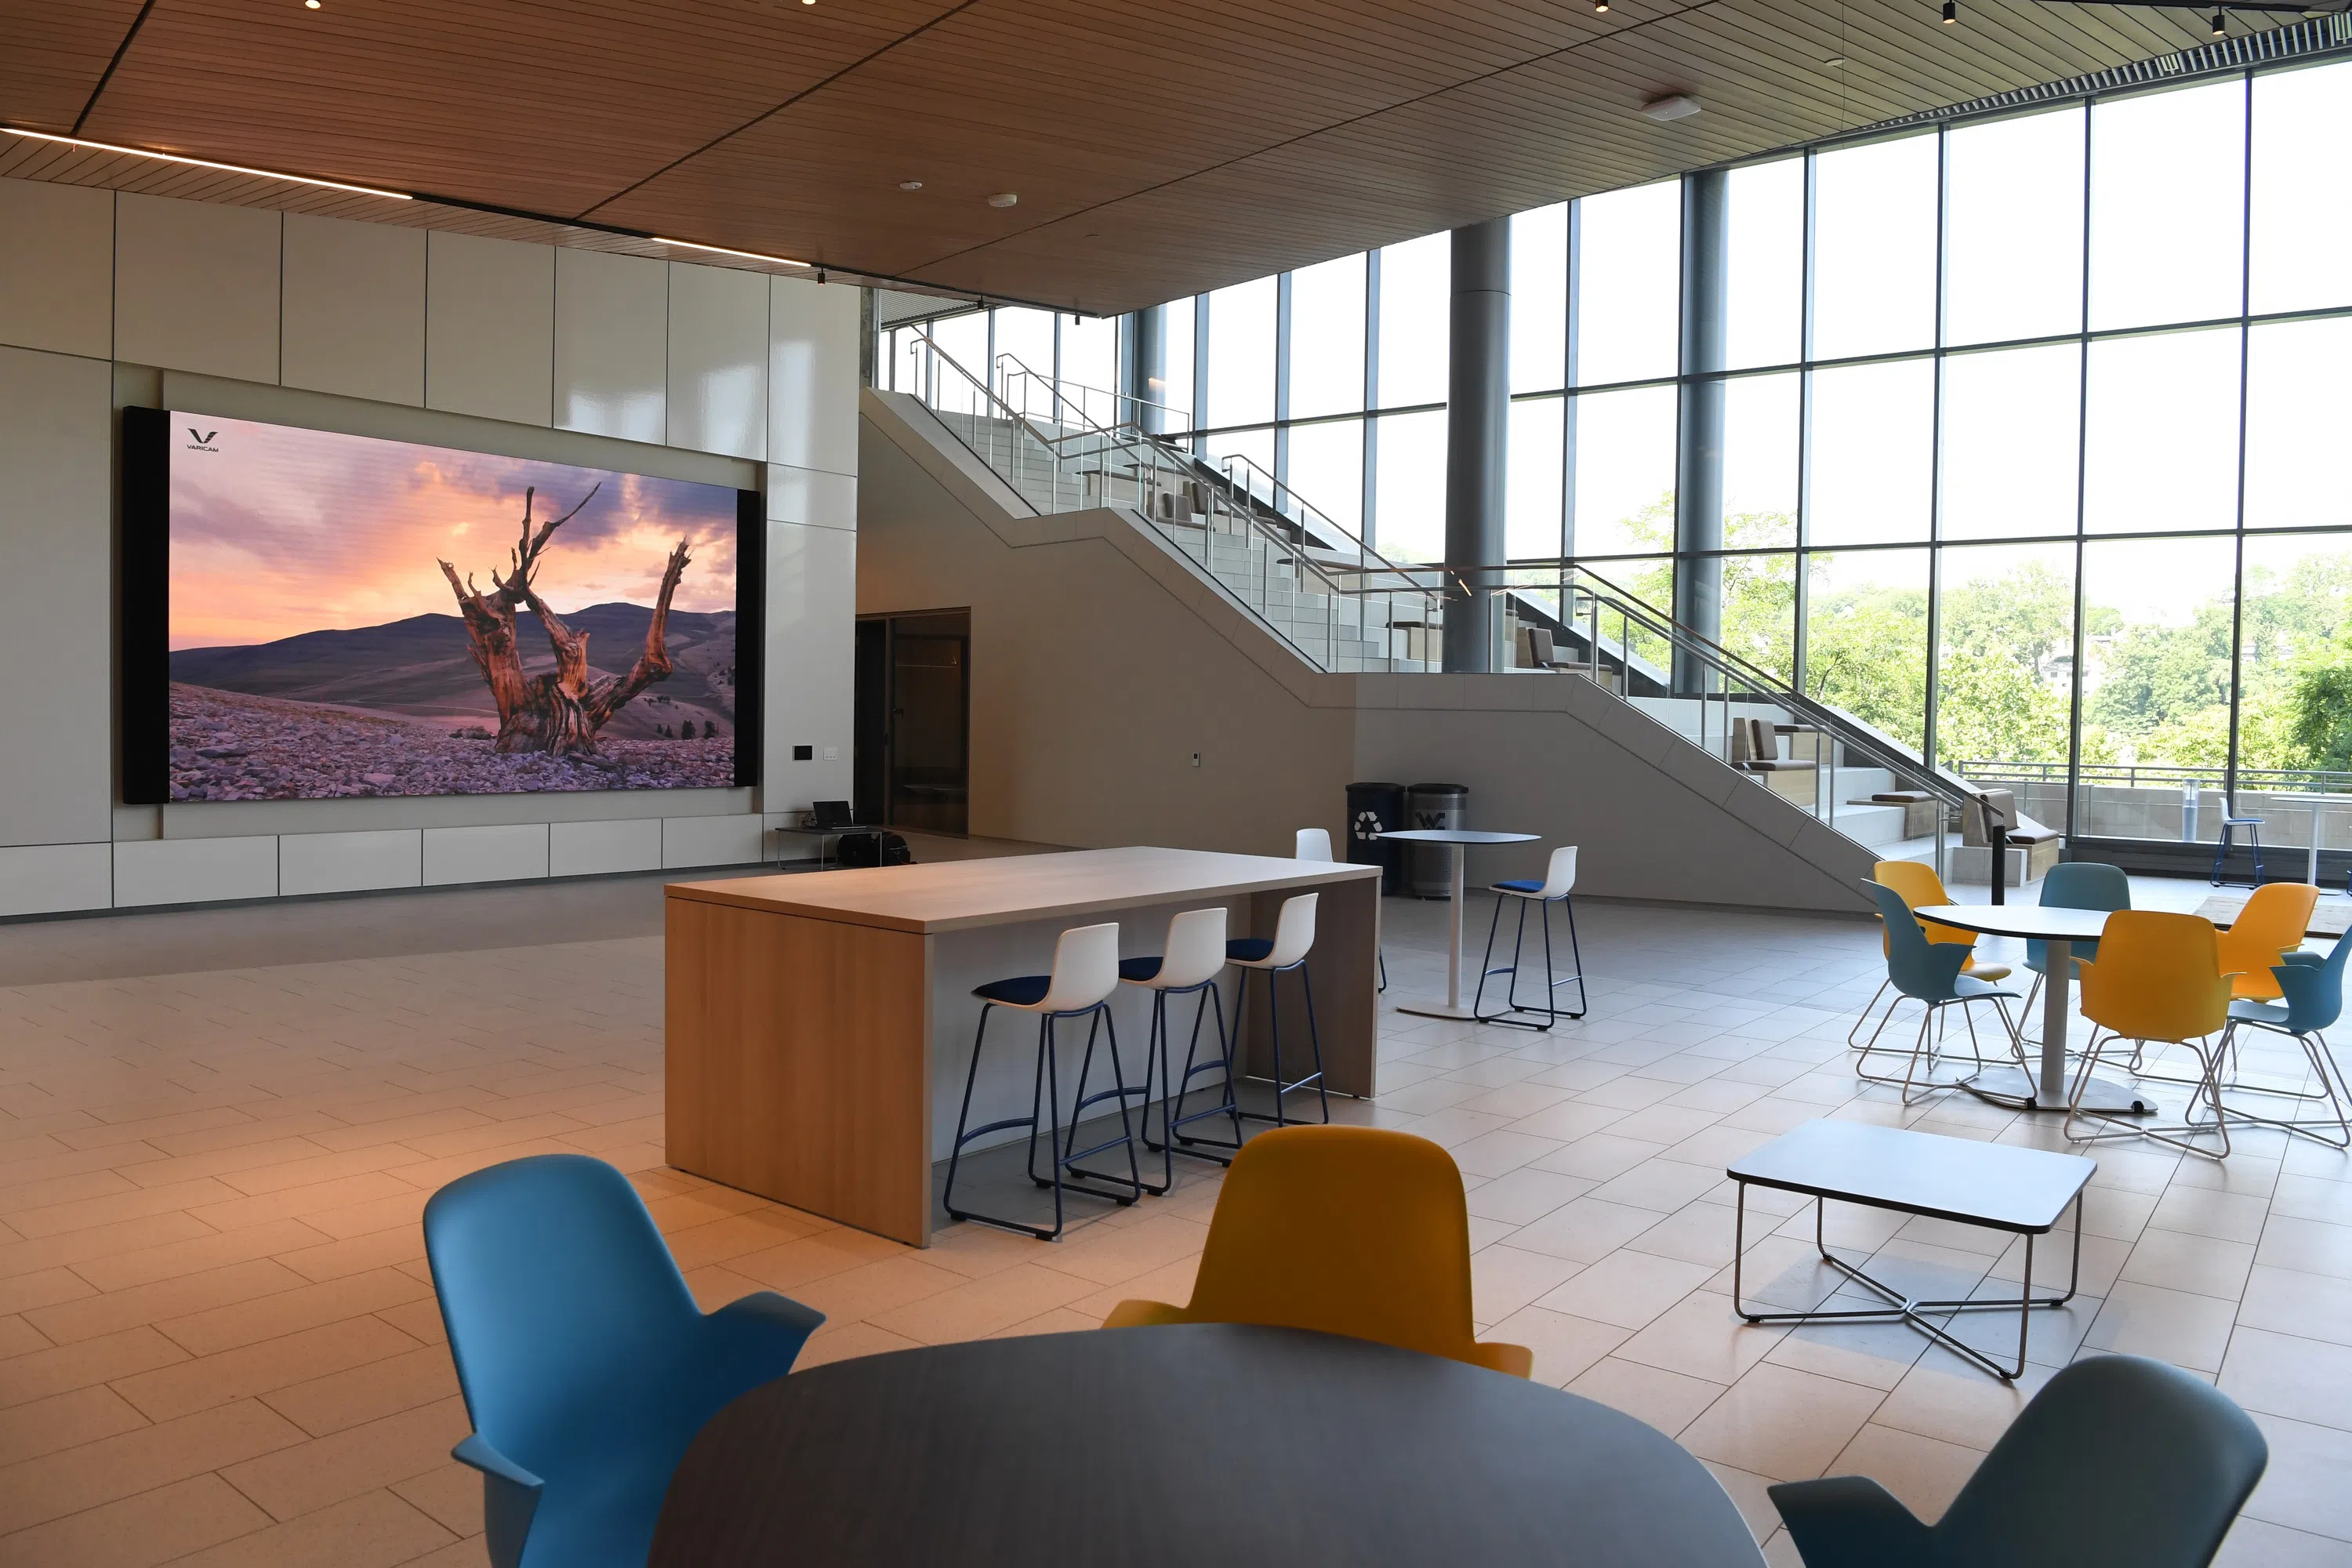 Image shows open room with various desk and chair setups for students to use. There is a large screen display next to the grand staircase, complete with stair seating. 